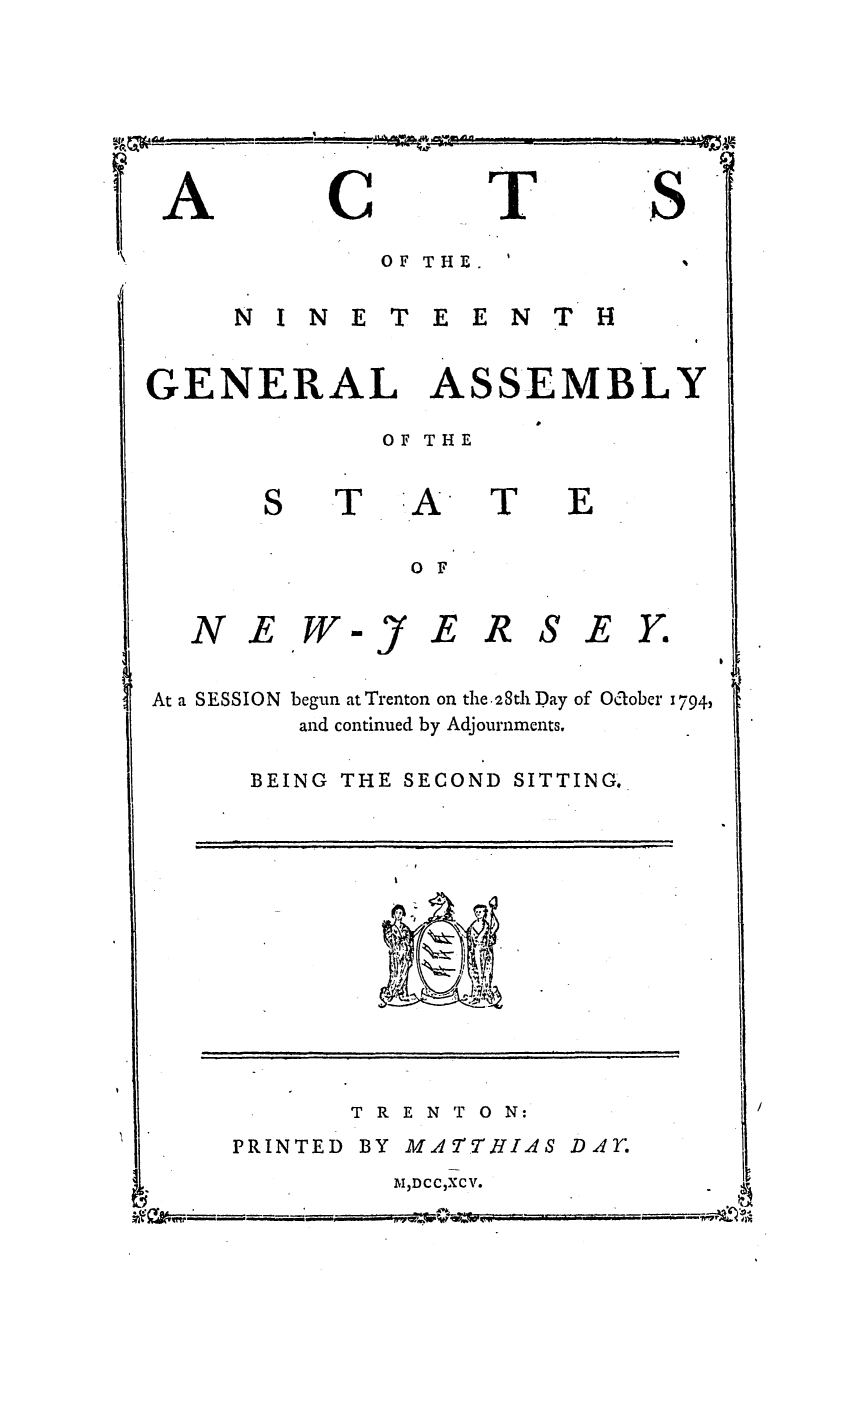 handle is hein.ssl/ssnj0260 and id is 1 raw text is: C

T

OF THE.

N I N E T E E N T H

GENERAL

ASS

EMBLY

OF THE

A

0 F

N EW

At a SESSION

-)

E R SE Y.

begun at Trenton on the .2Sdl Day of Ocober 1794,
and continued by Adjournments.

BEING THE SECOND SITTING.

TRENTON:

PRINTED BY

M A4TTHI AS

M ,DCCXCV.

A

S8

T

T

E

DAY.

,   Iml
L      . ...   .  :  .


